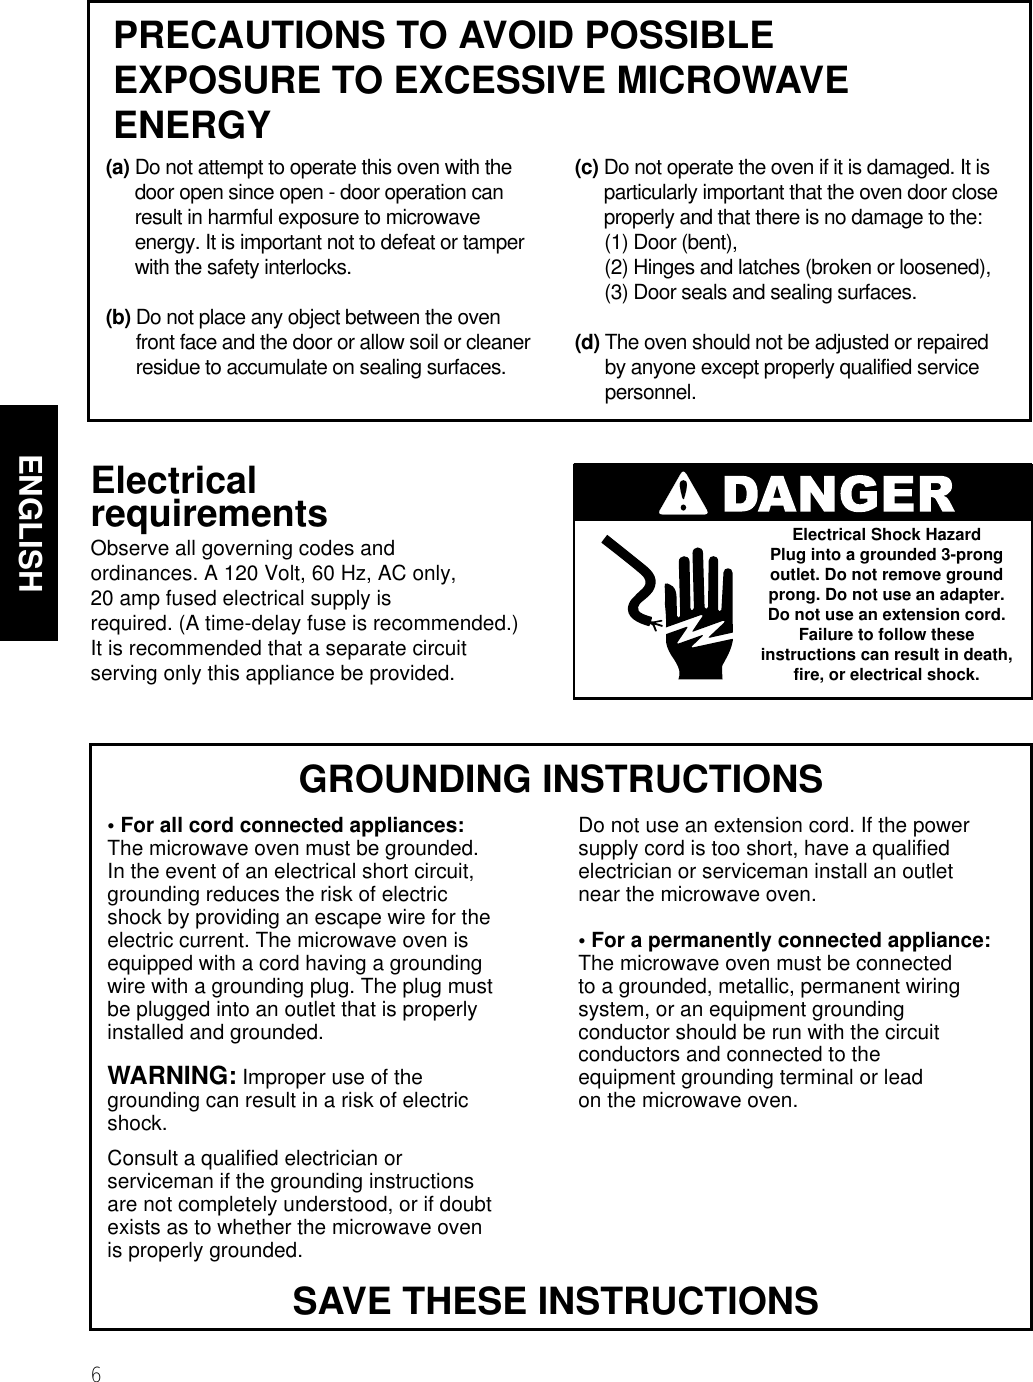 6ENGLISHMICROWAVE OVEN SAFETY  GROUNDING INSTRUCTIONS• For all cord connected appliances:The microwave oven must be grounded.In the event of an electrical short circuit,grounding reduces the risk of electricshock by providing an escape wire for theelectric current. The microwave oven isequipped with a cord having a groundingwire with a grounding plug. The plug mustbe plugged into an outlet that is properlyinstalled and grounded.WARNING: Improper use of thegrounding can result in a risk of electricshock.Consult a qualified electrician orserviceman if the grounding instructionsare not completely understood, or if doubtexists as to whether the microwave ovenis properly grounded.Do not use an extension cord. If the powersupply cord is too short, have a qualifiedelectrician or serviceman install an outletnear the microwave oven.• For a permanently connected appliance:The microwave oven must be connectedto a grounded, metallic, permanent wiringsystem, or an equipment groundingconductor should be run with the circuitconductors and connected to theequipment grounding terminal or lead on the microwave oven.ElectricalrequirementsObserve all governing codes andordinances. A 120 Volt, 60 Hz, AC only,20 amp fused electrical supply isrequired. (A time-delay fuse is recommended.)It is recommended that a separate circuitserving only this appliance be provided.Electrical Shock HazardPlug into a grounded 3-prongoutlet. Do not remove groundprong. Do not use an adapter.Do not use an extension cord.Failure to follow theseinstructions can result in death,fire, or electrical shock.SAVE THESE INSTRUCTIONSPRECAUTIONS TO AVOID POSSIBLEEXPOSURE TO EXCESSIVE MICROWAVEENERGY(a) Do not attempt to operate this oven with thedoor open since open - door operation canresult in harmful exposure to microwaveenergy. It is important not to defeat or tamperwith the safety interlocks.(b) Do not place any object between the ovenfront face and the door or allow soil or cleanerresidue to accumulate on sealing surfaces.(c) Do not operate the oven if it is damaged. It isparticularly important that the oven door closeproperly and that there is no damage to the:(1) Door (bent),(2) Hinges and latches (broken or loosened),(3) Door seals and sealing surfaces.(d) The oven should not be adjusted or repairedby anyone except properly qualified servicepersonnel.